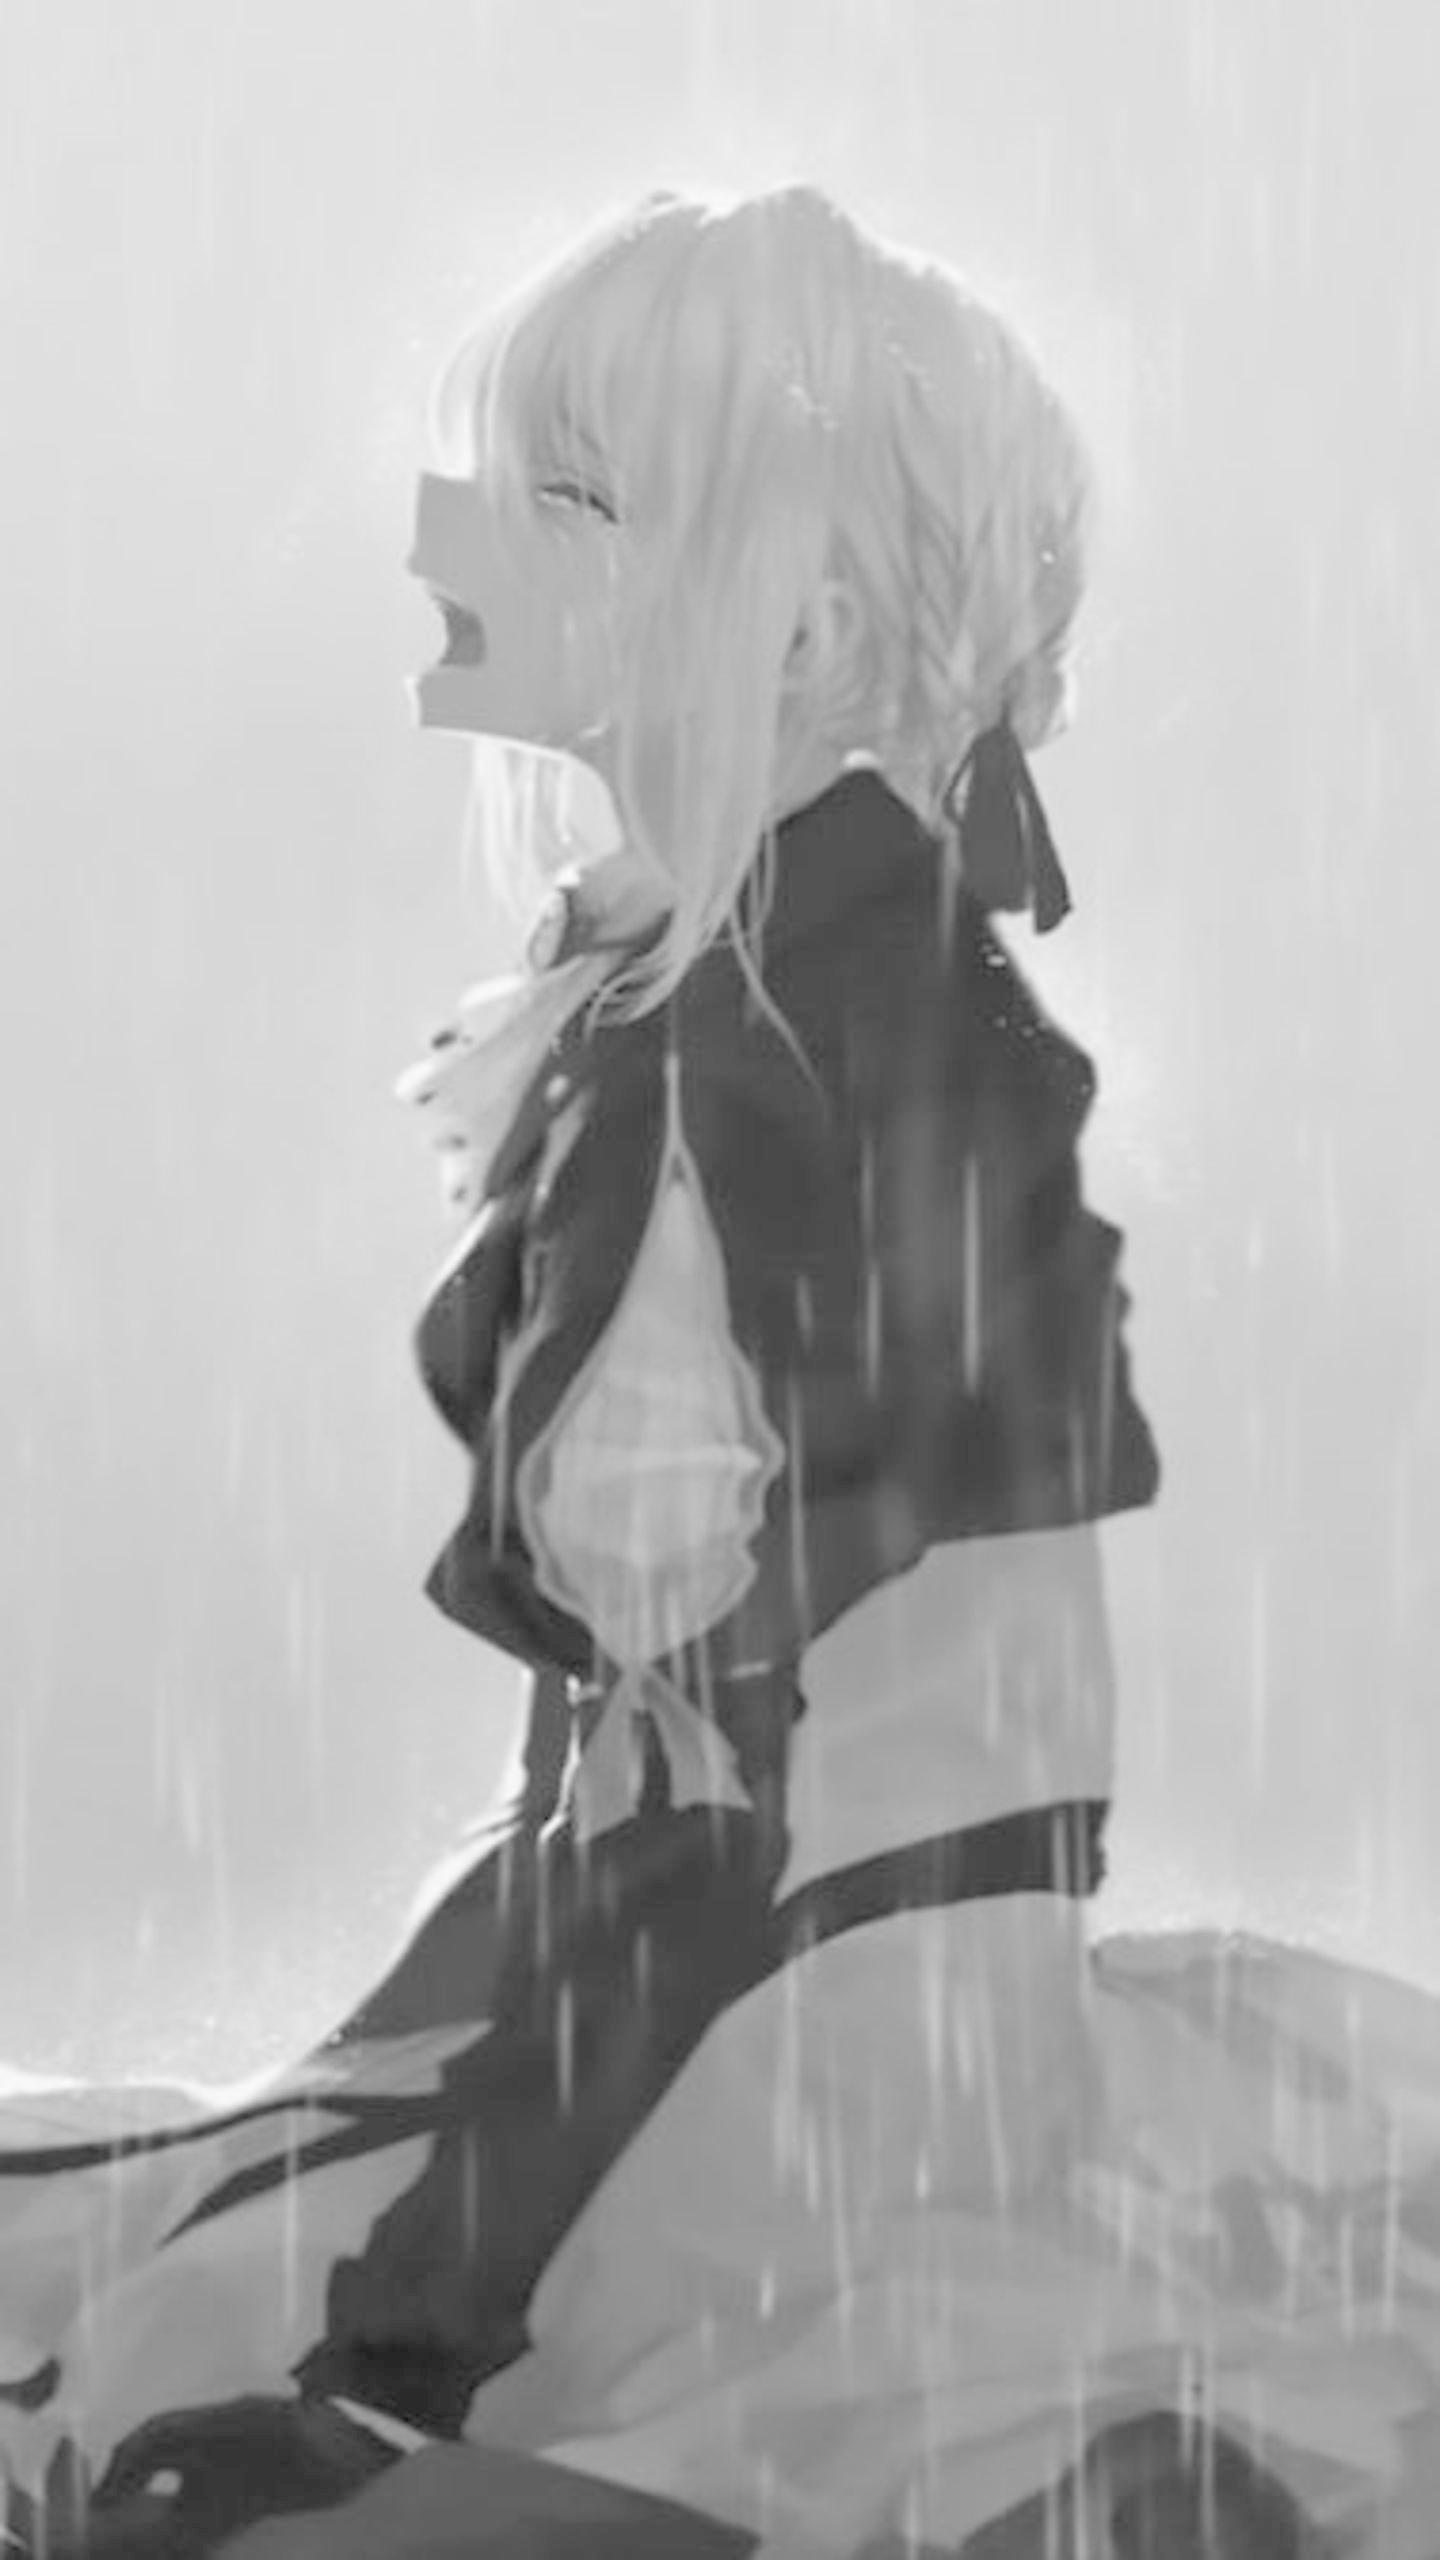 Sad Anime Wallpapers for Android